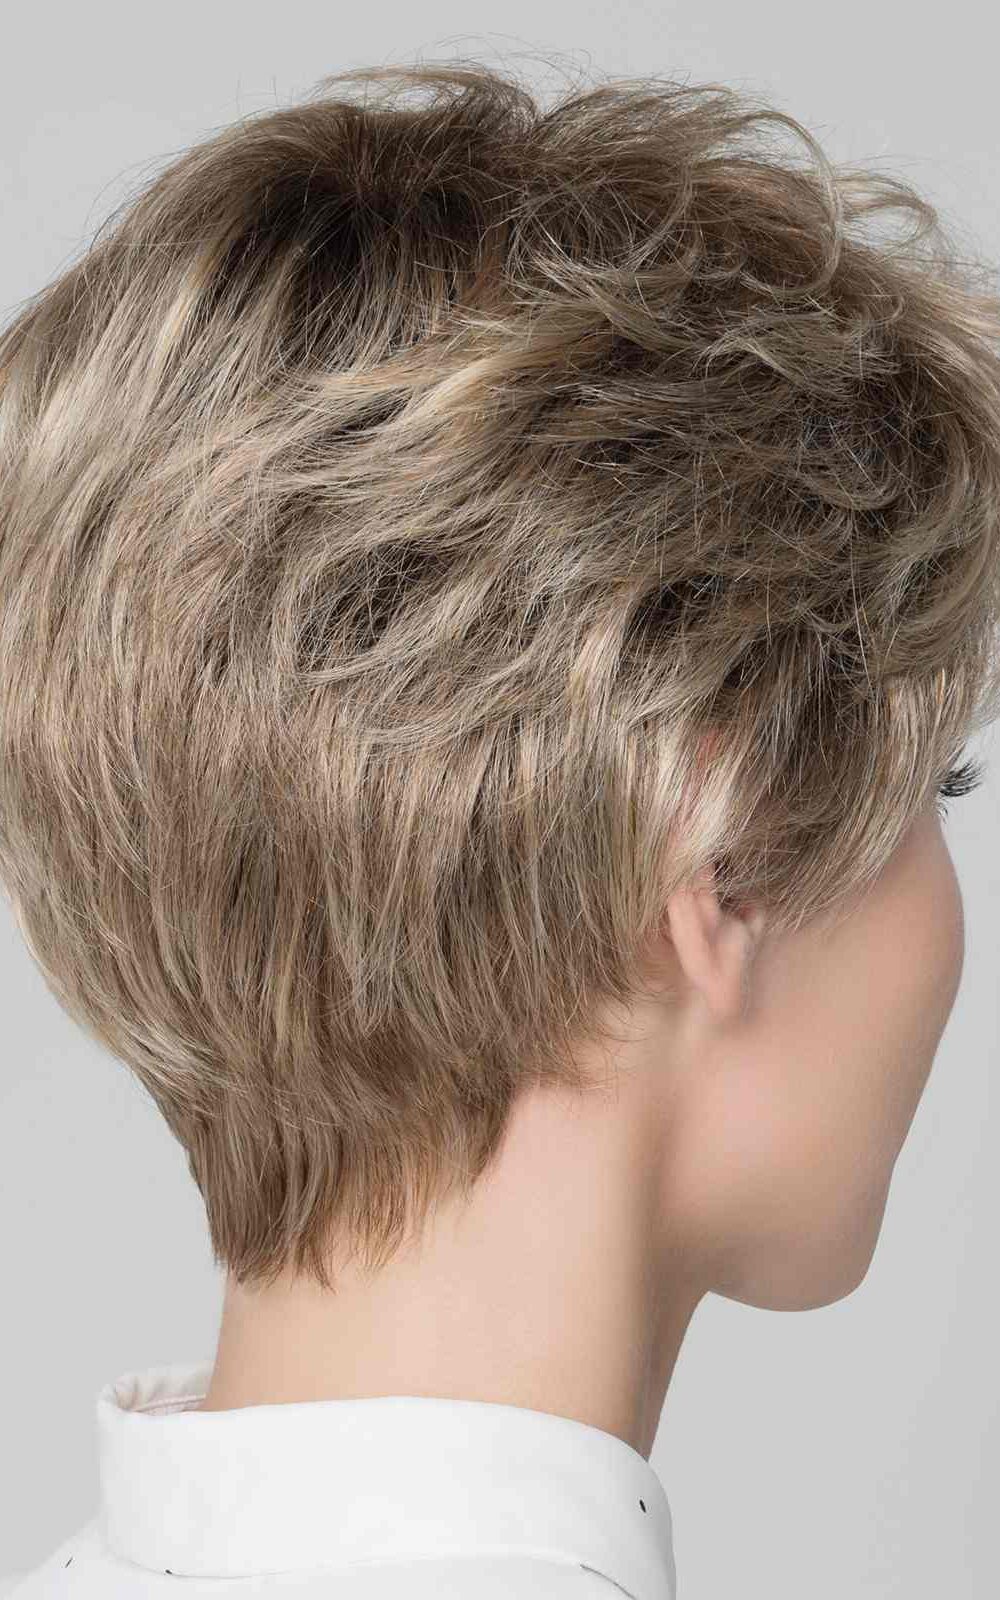 Alba Comfort wig | Beautiful nape | The natural looking fibre hair can be styled using wig fibre products or just finger teased | Elly-K.com.au